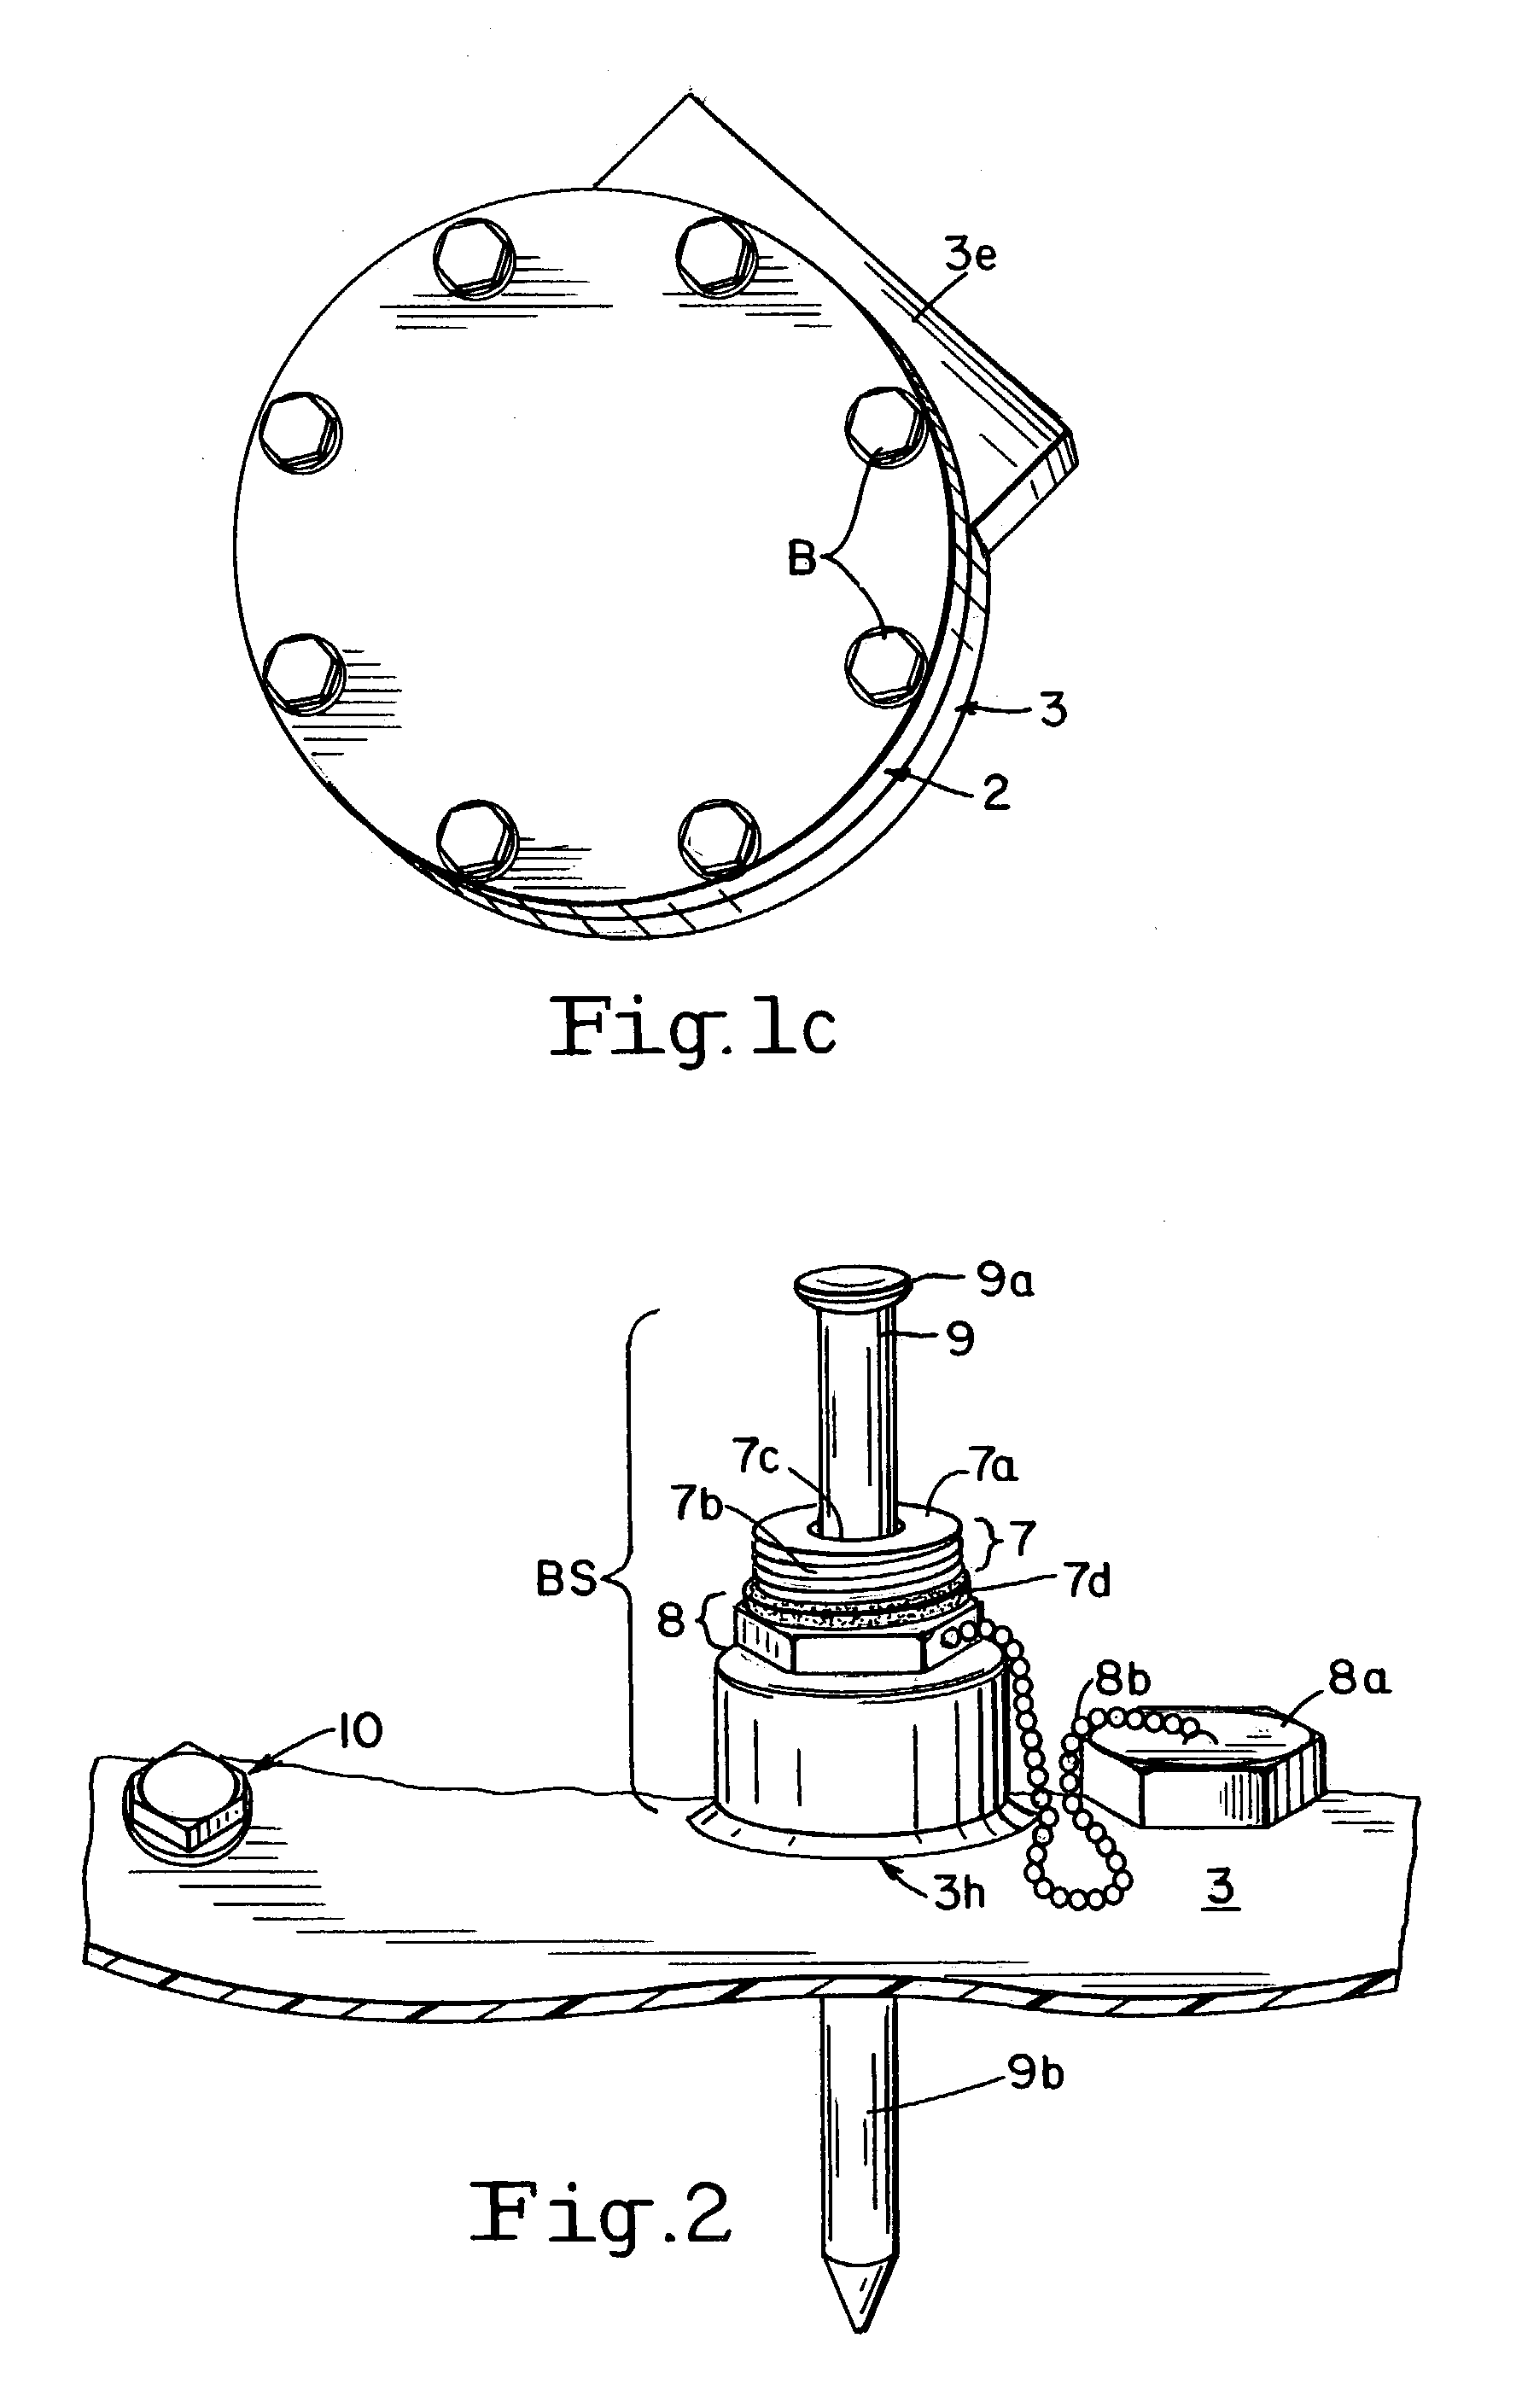 Device and method for neutralizing chemical agents